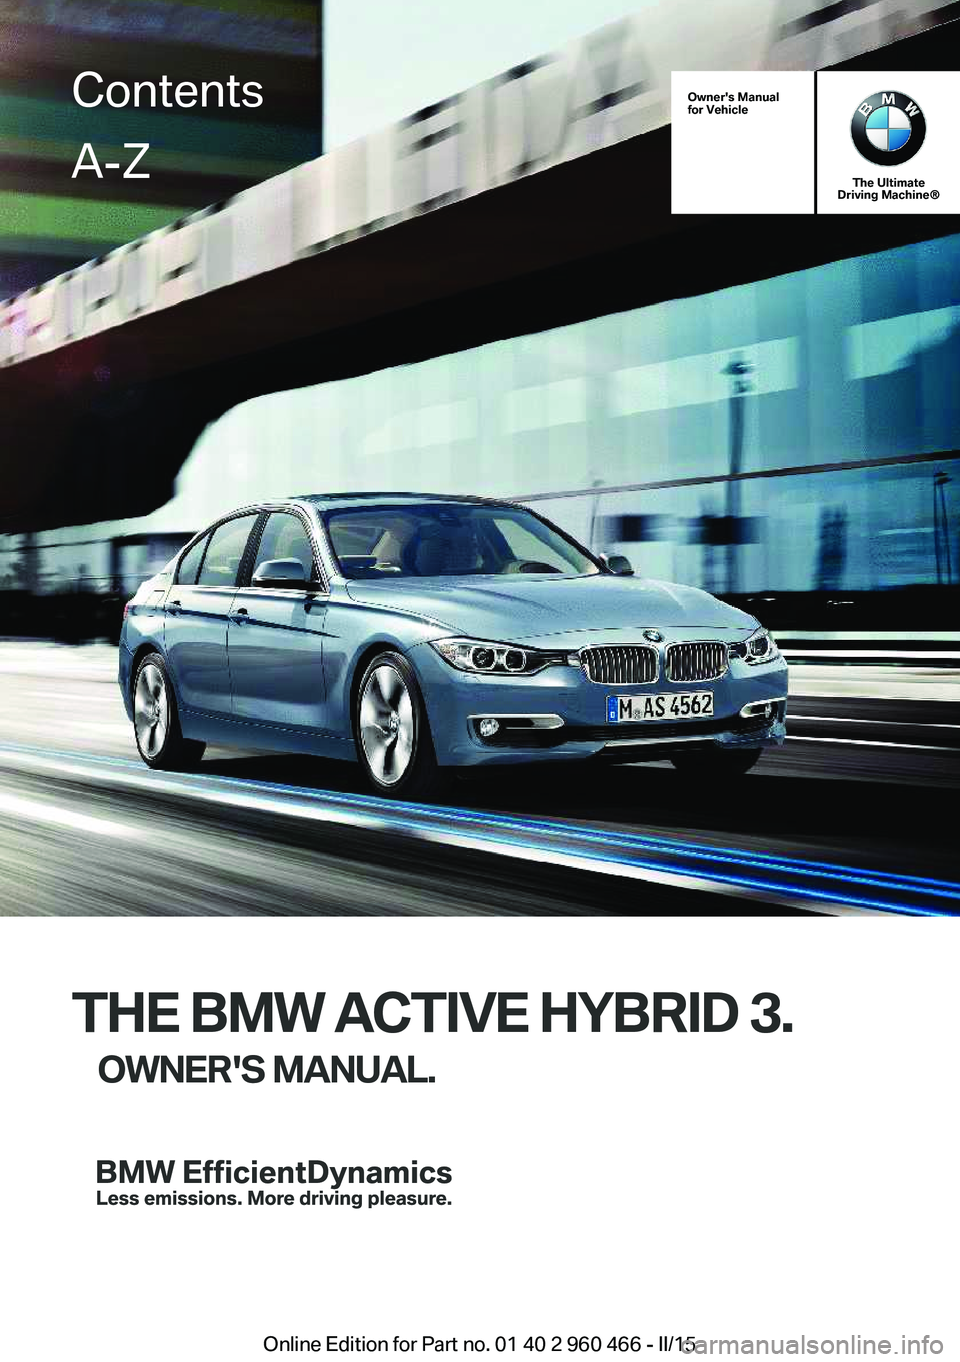 BMW 3 SERIES ACTIVE HYBRID 2015  Owners Manual Owner's Manual
for Vehicle
The Ultimate
Driving Machine®
THE BMW ACTIVE HYBRID 3.
OWNER'S MANUAL.
ContentsA-Z
Online Edition for Part no. 01 40 2 960 466 - II/15   